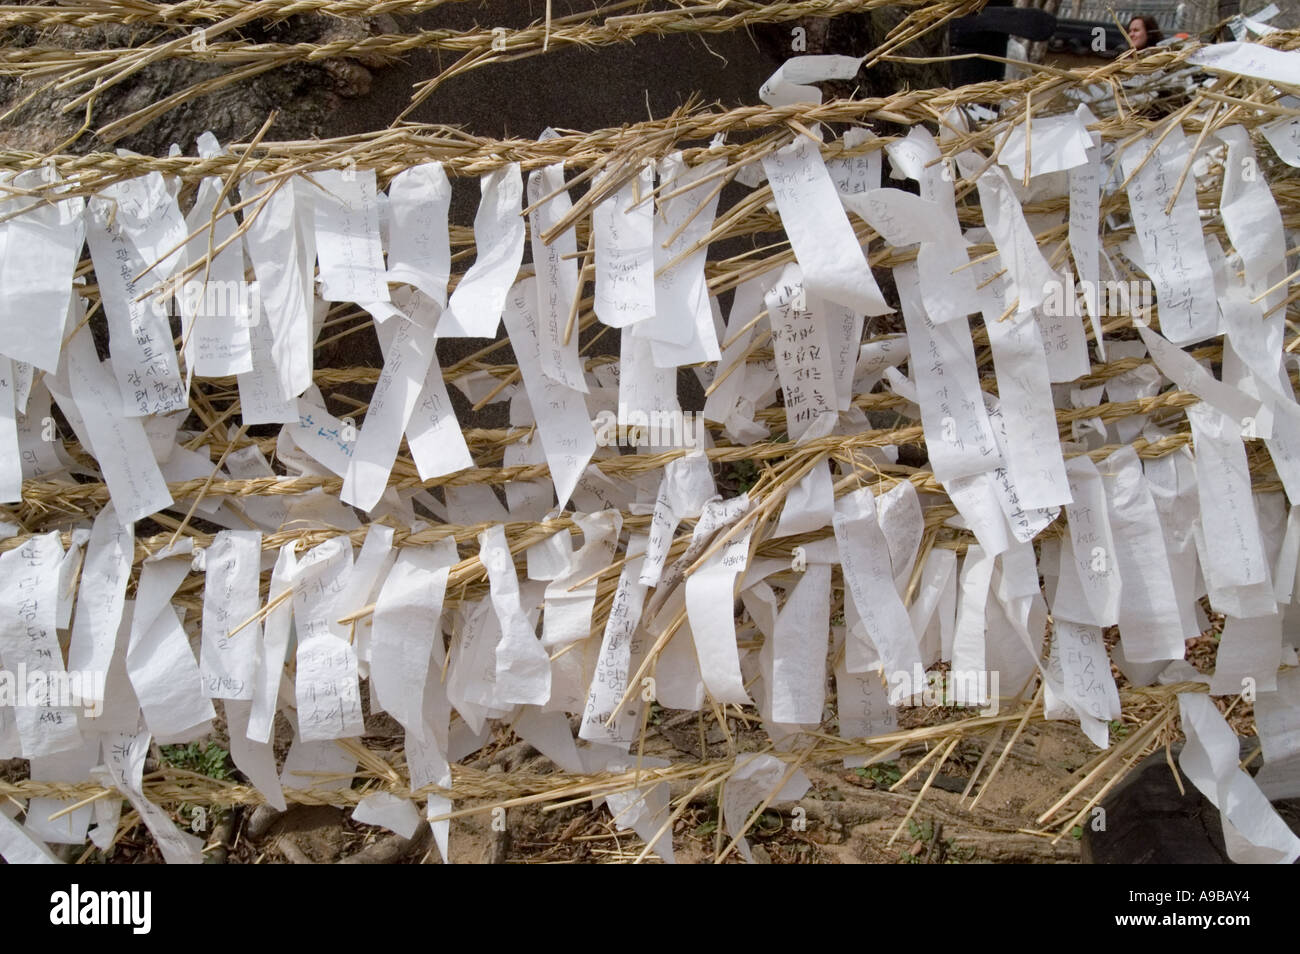 Wishes tied around a tree at Hahoe Folk Village in Andong, South Korea. Stock Photo